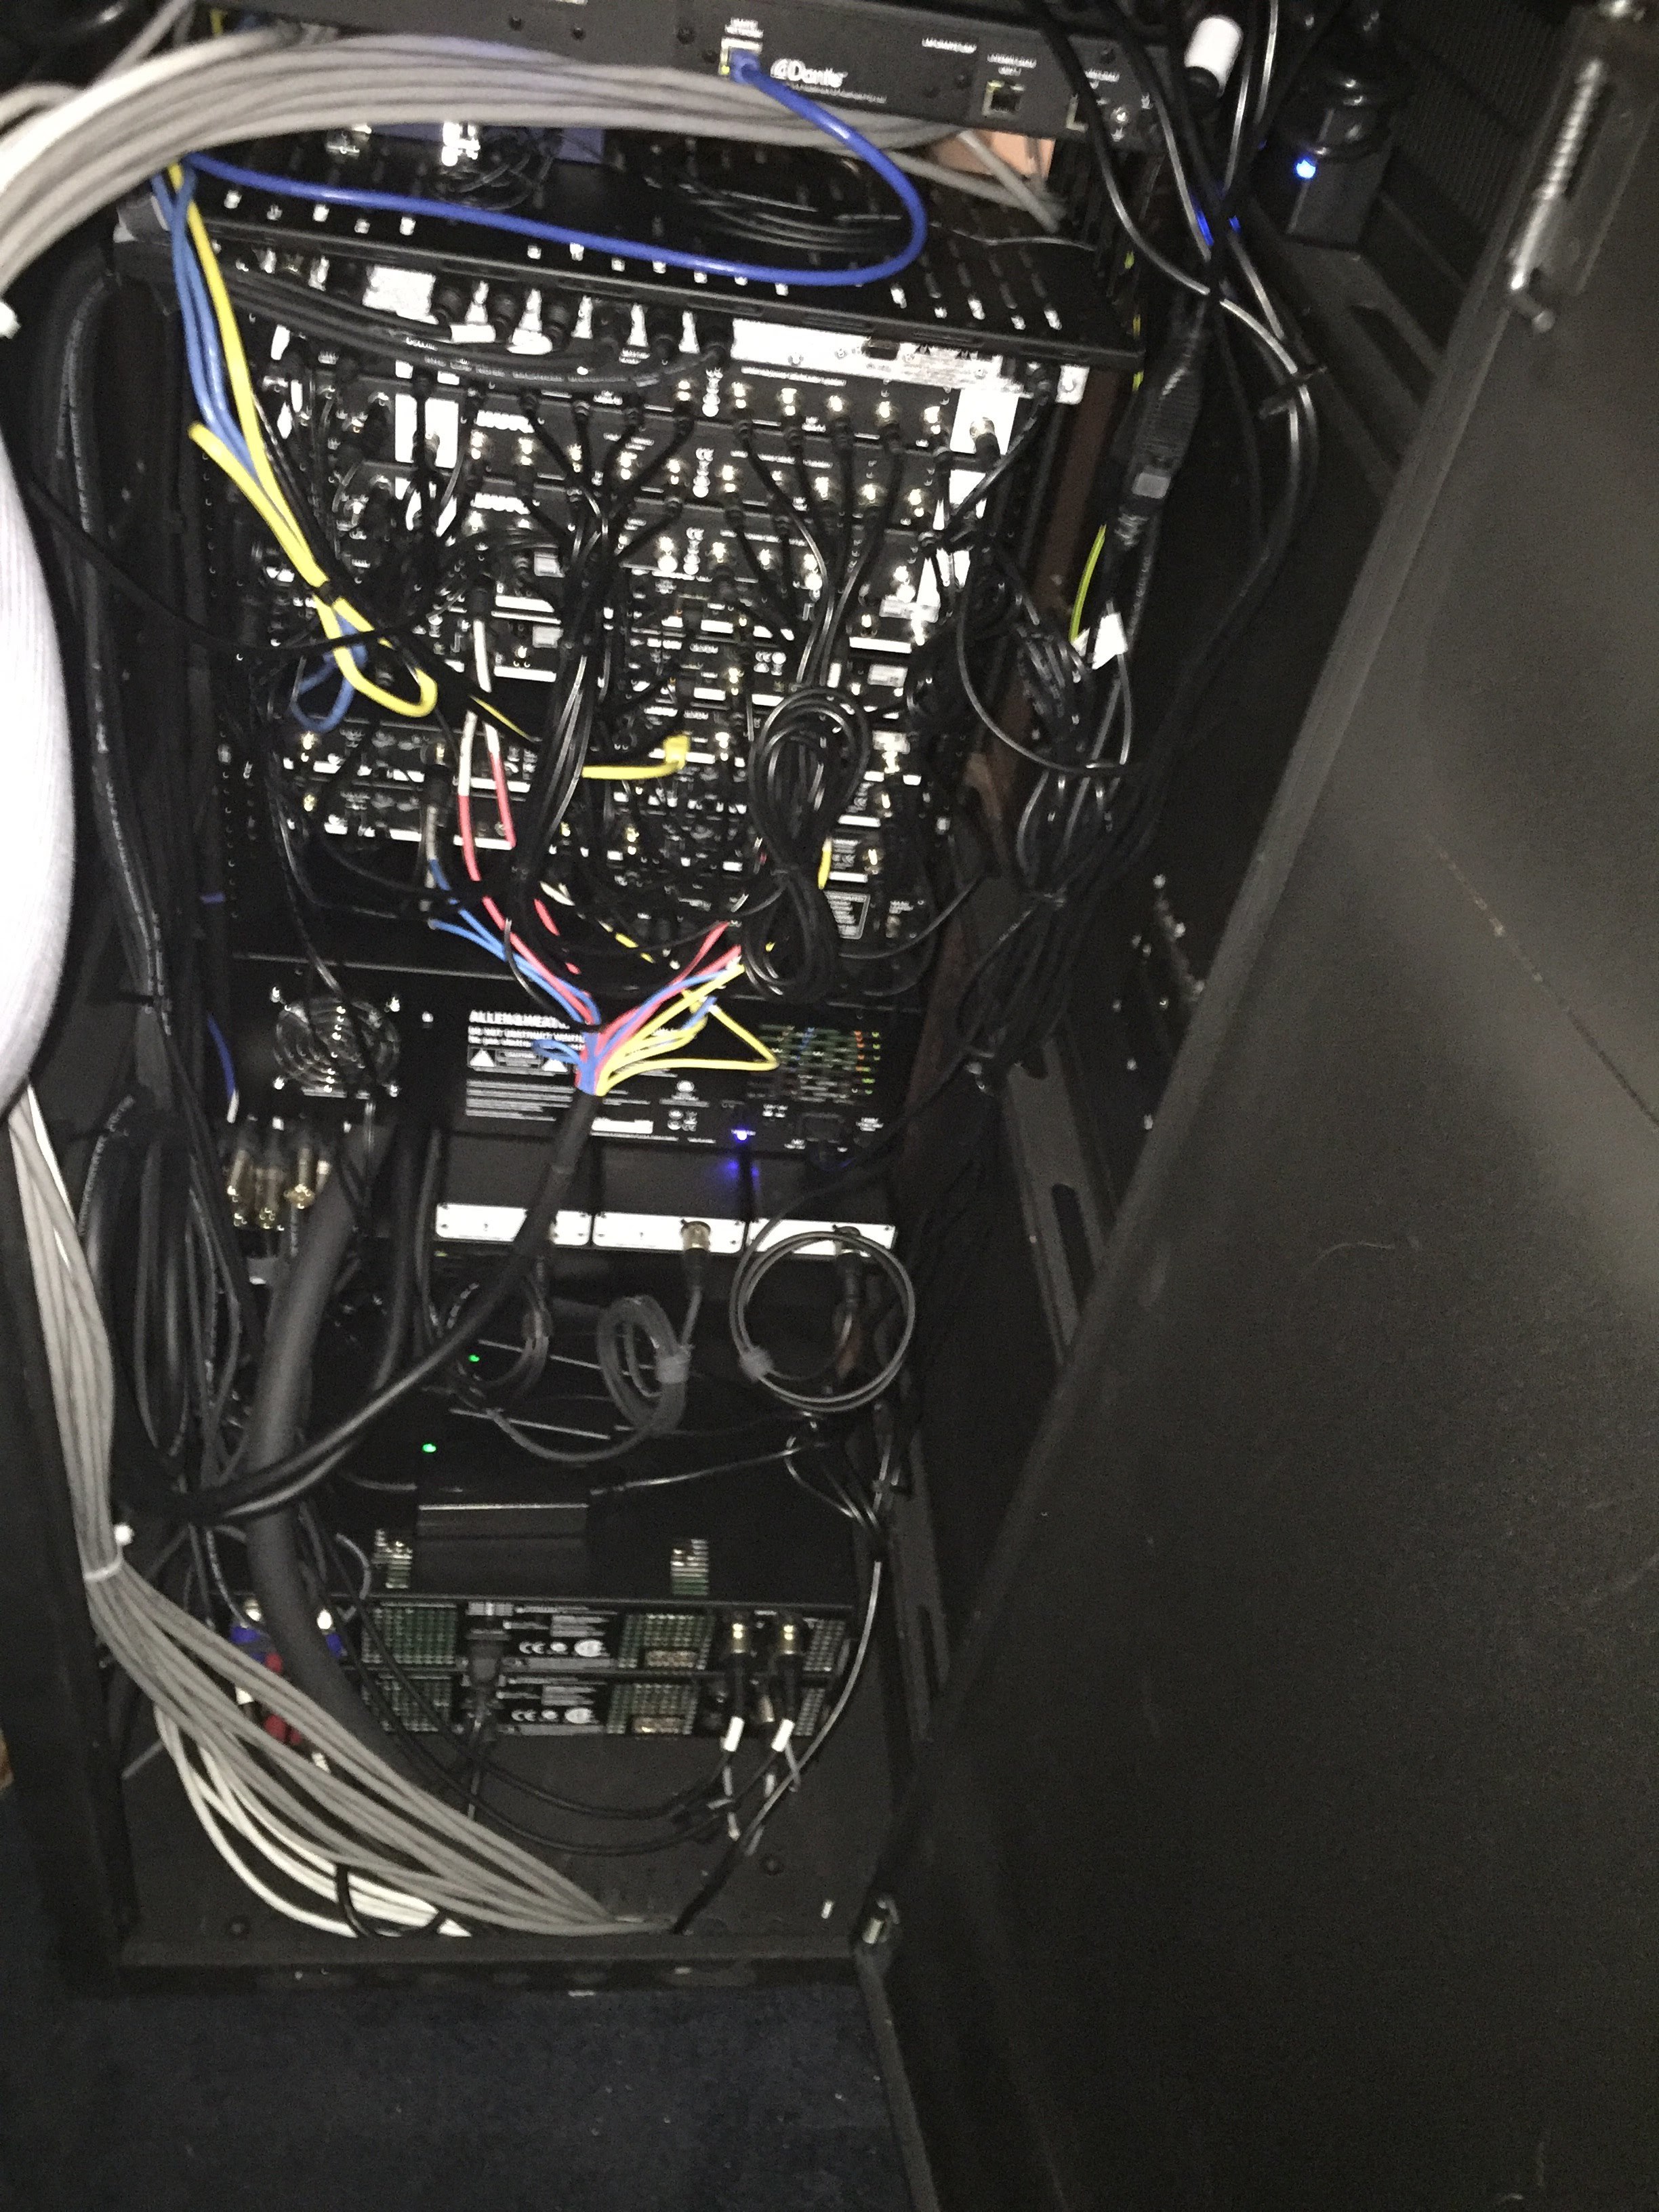 Cable management and RNDI's moved off stage into rack